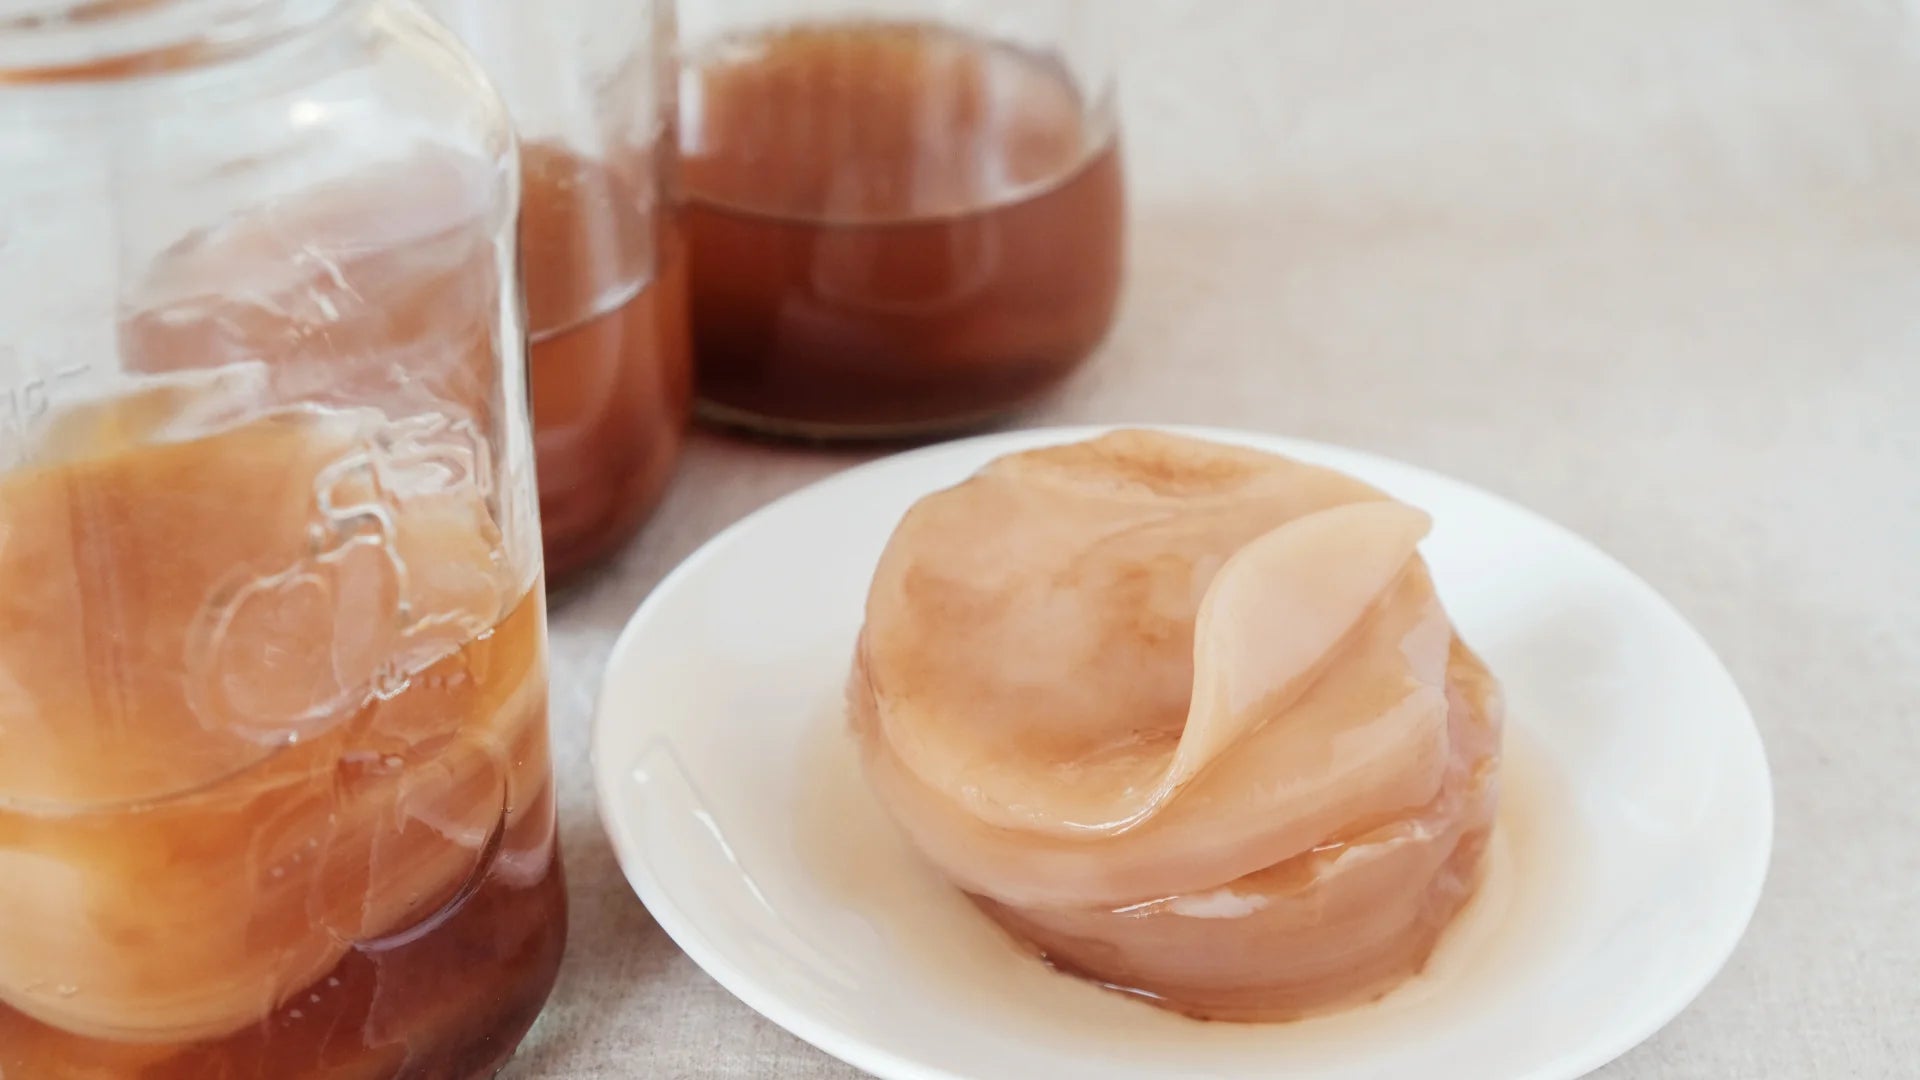 Kombucha Recipe  Learn How to Make Homemade Kombucha from a SCOBY -  Cultures For Health